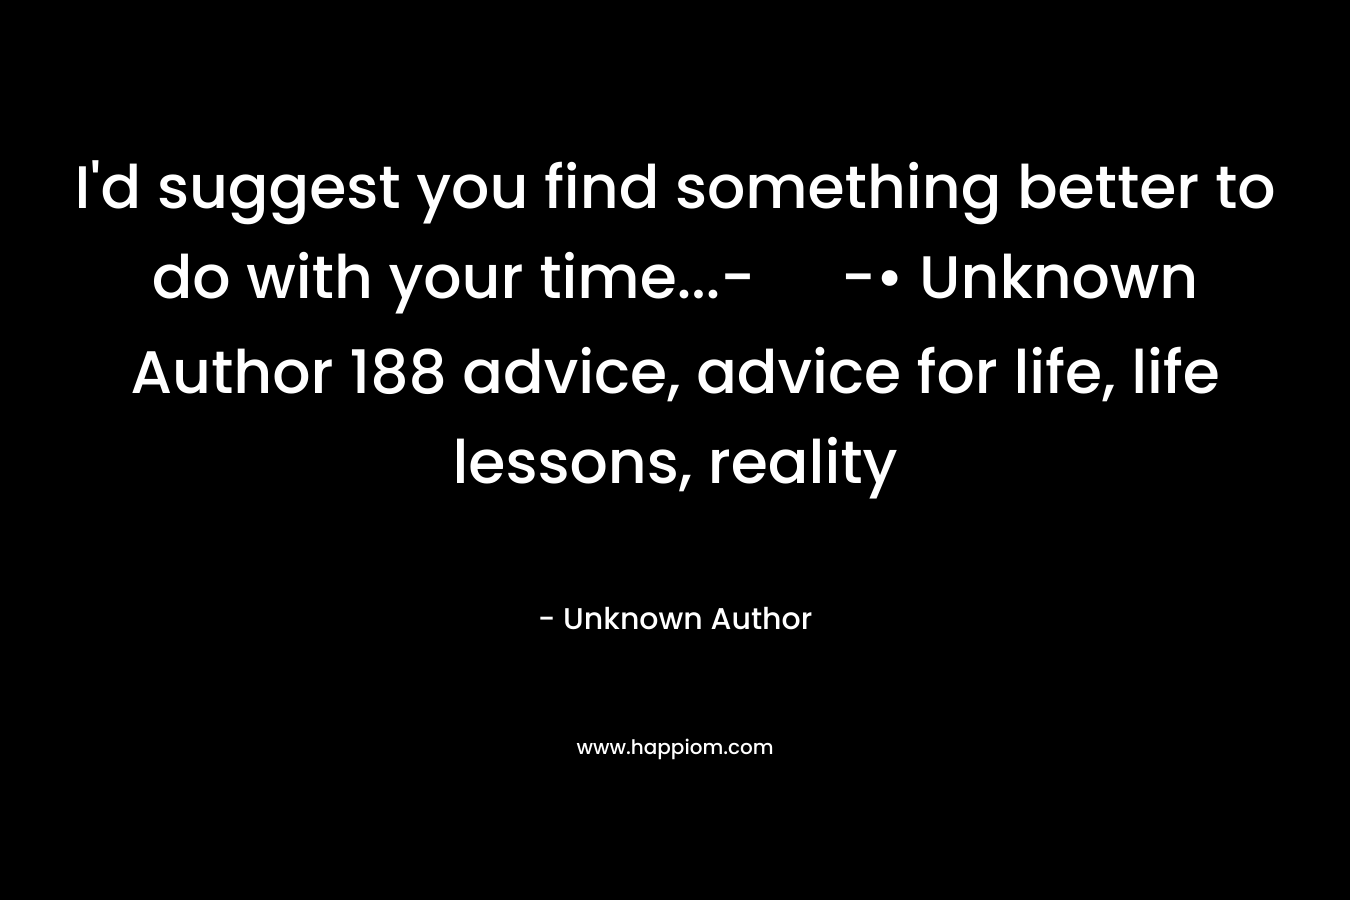 I'd suggest you find something better to do with your time...- -• Unknown Author 188 advice, advice for life, life lessons, reality